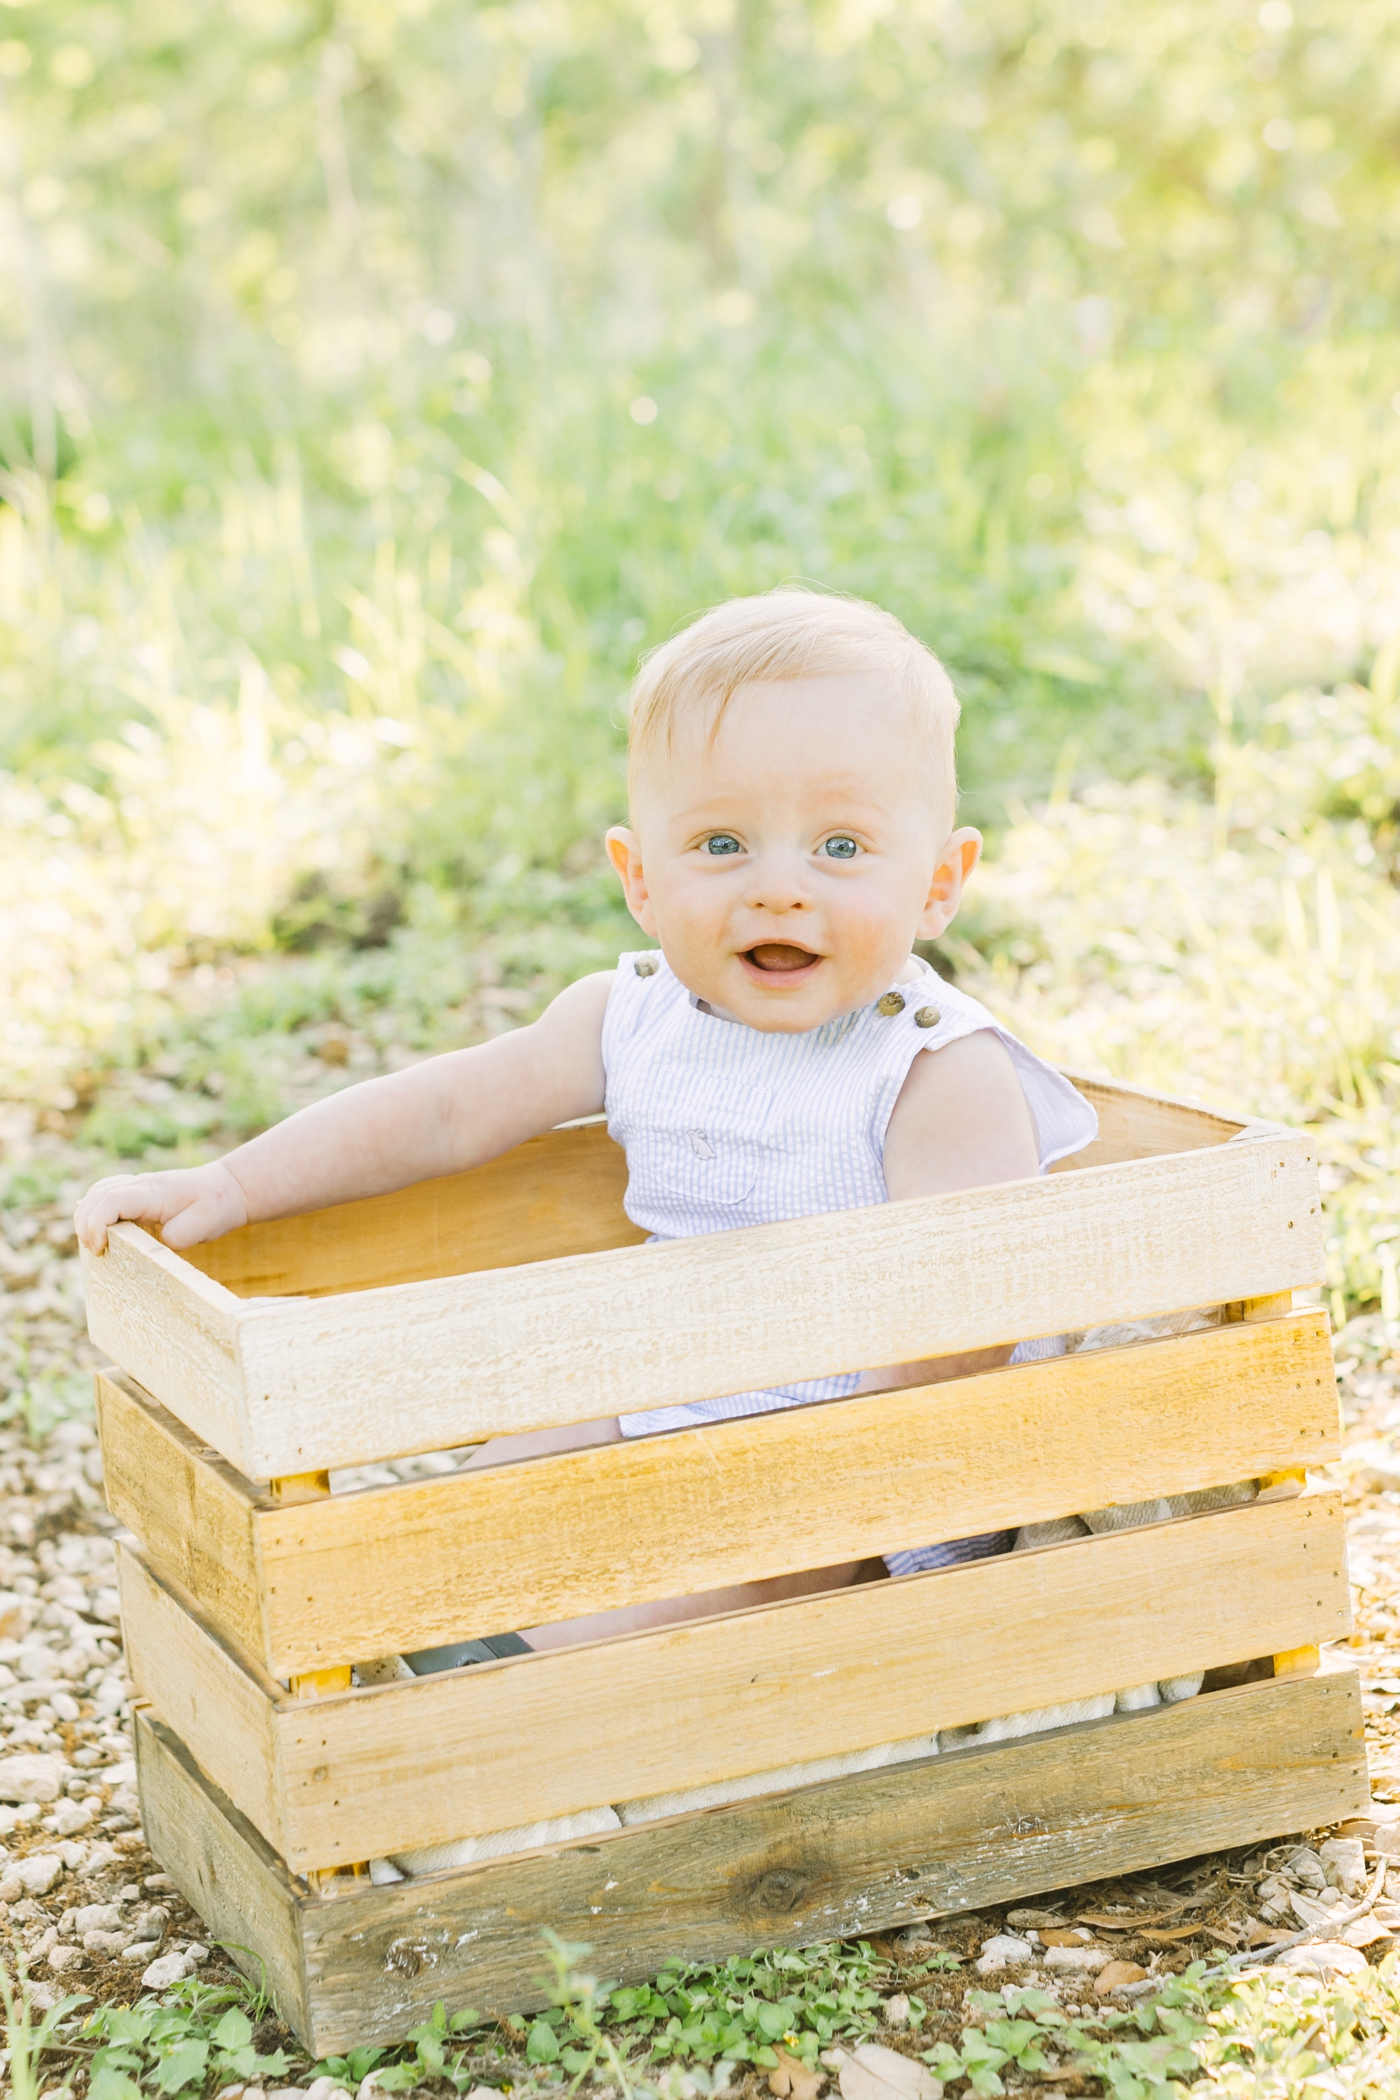 Baby sitting in wooden crate during 6 month milestone session. Photo by Sana Ahmed Photography.